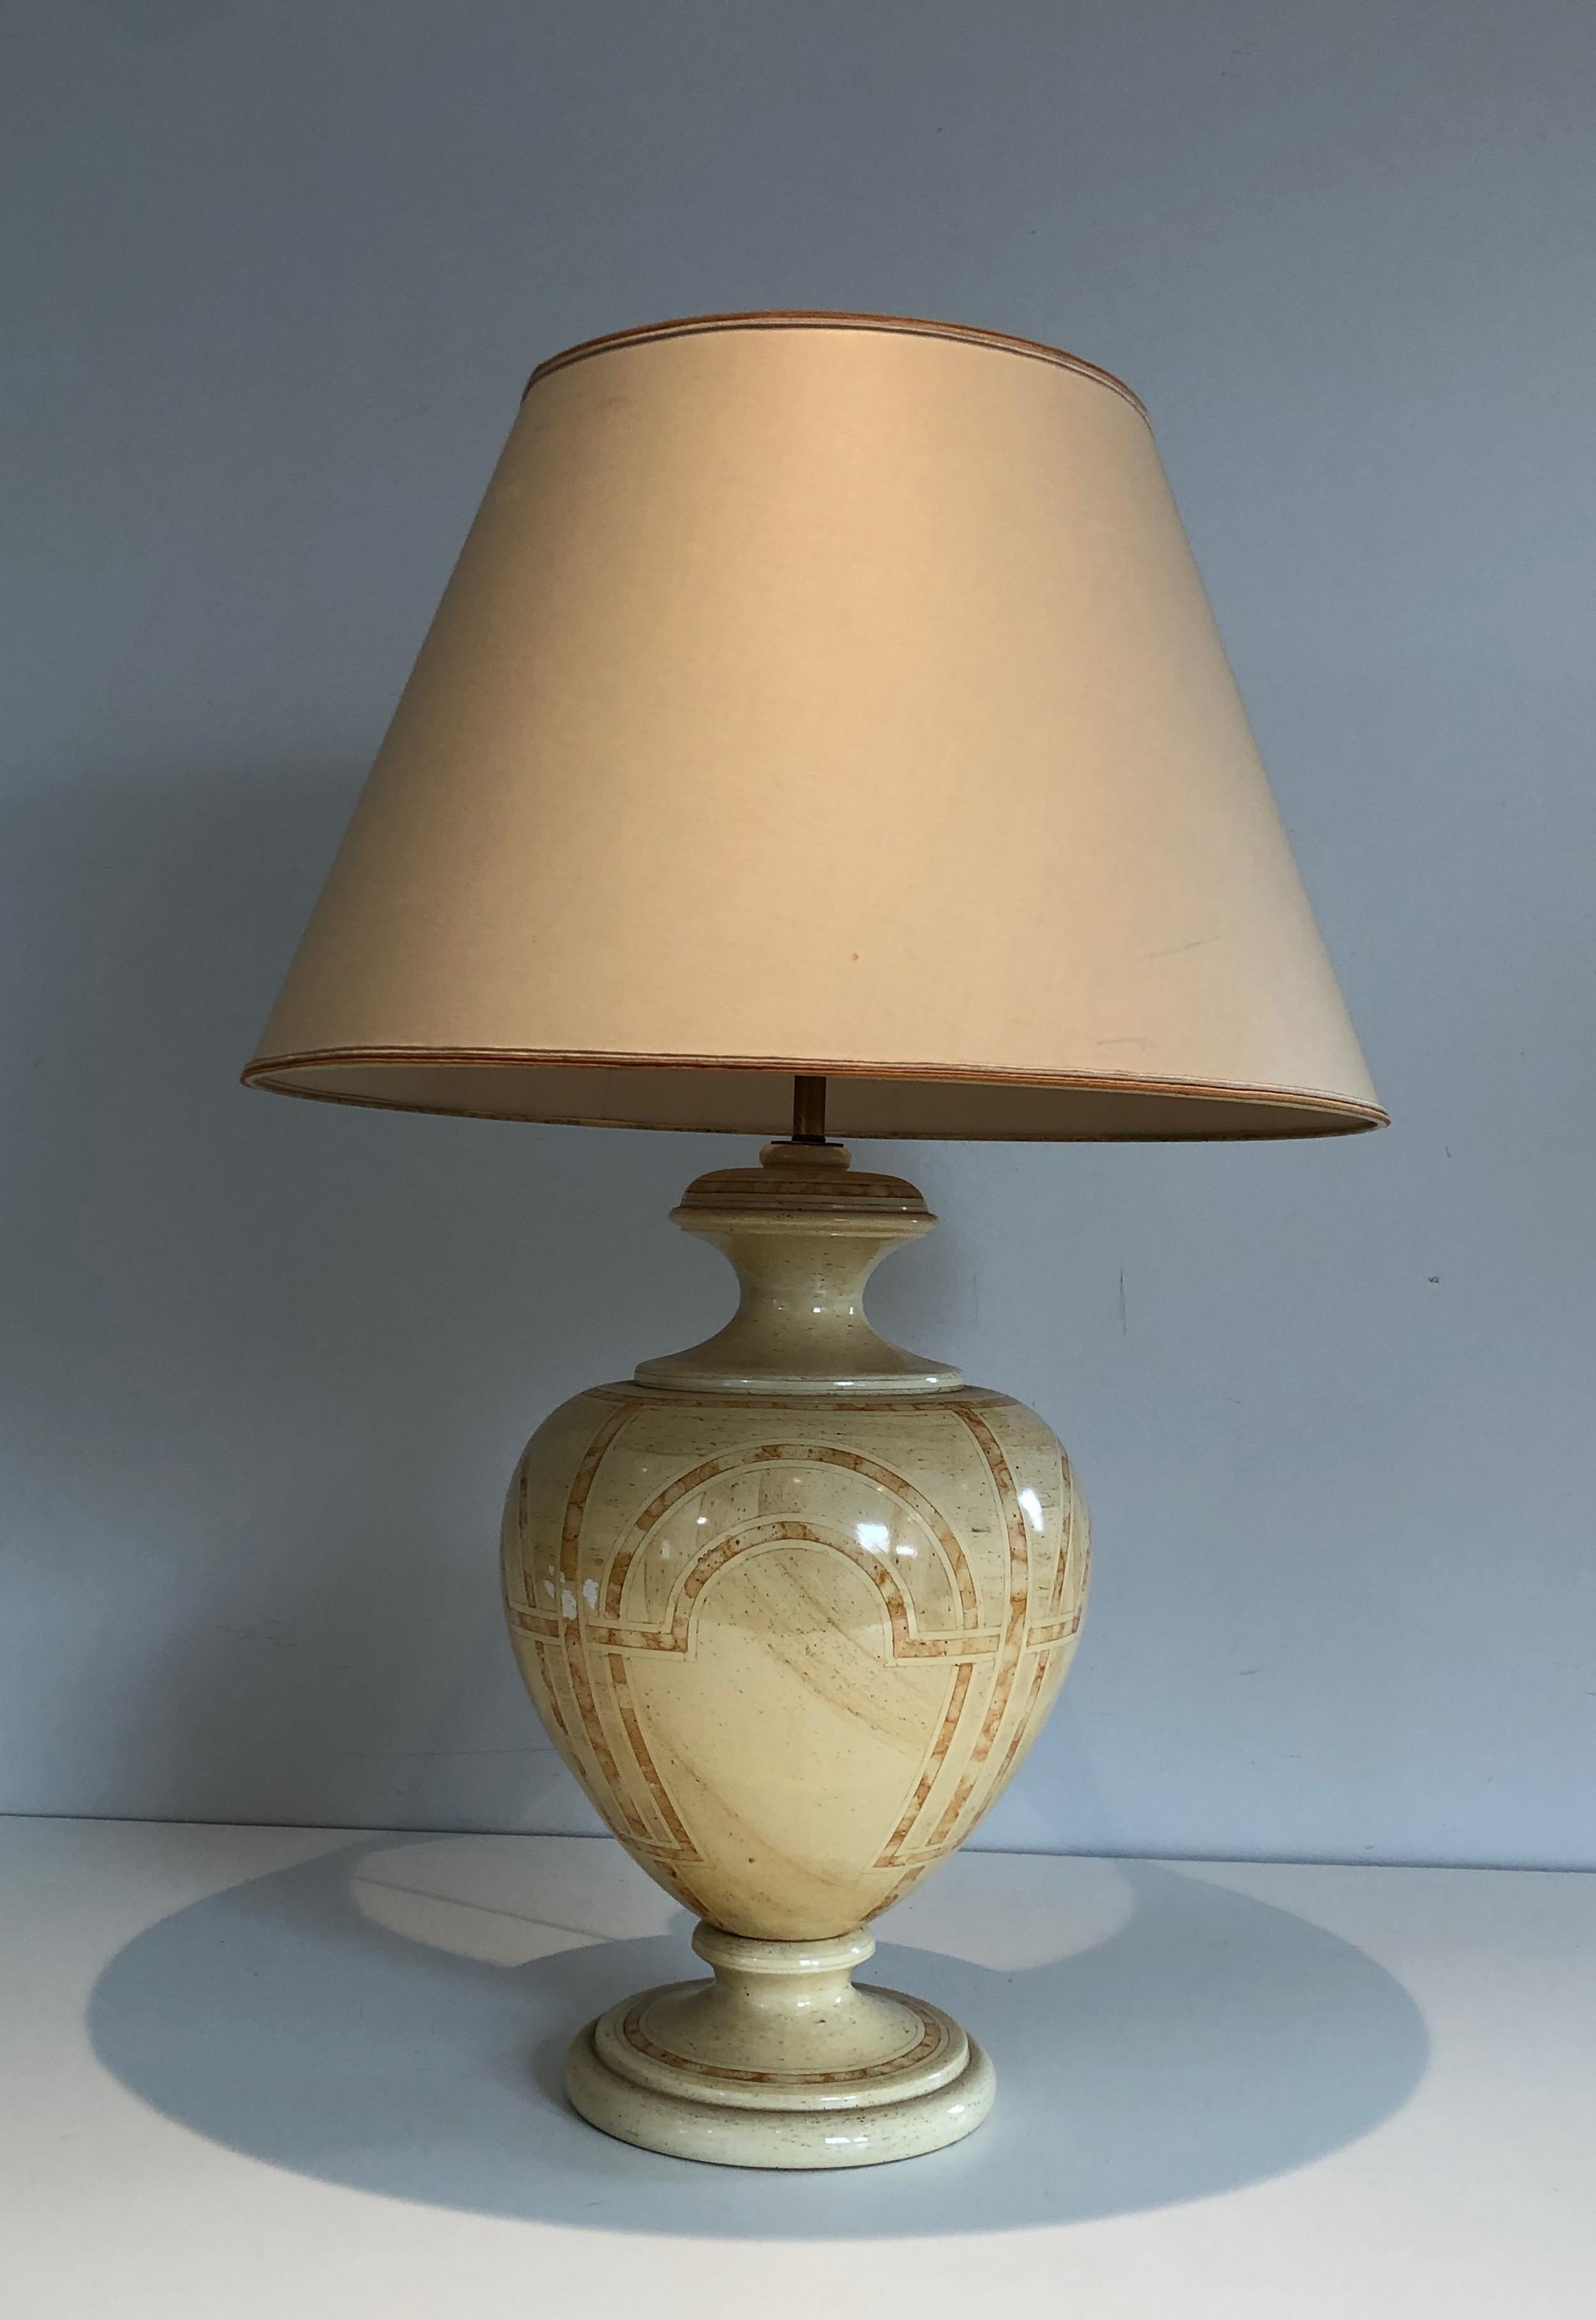 Eggshell Lacquered Table Lamp with Interlacing Decors, French Work, circa 1970 For Sale 12